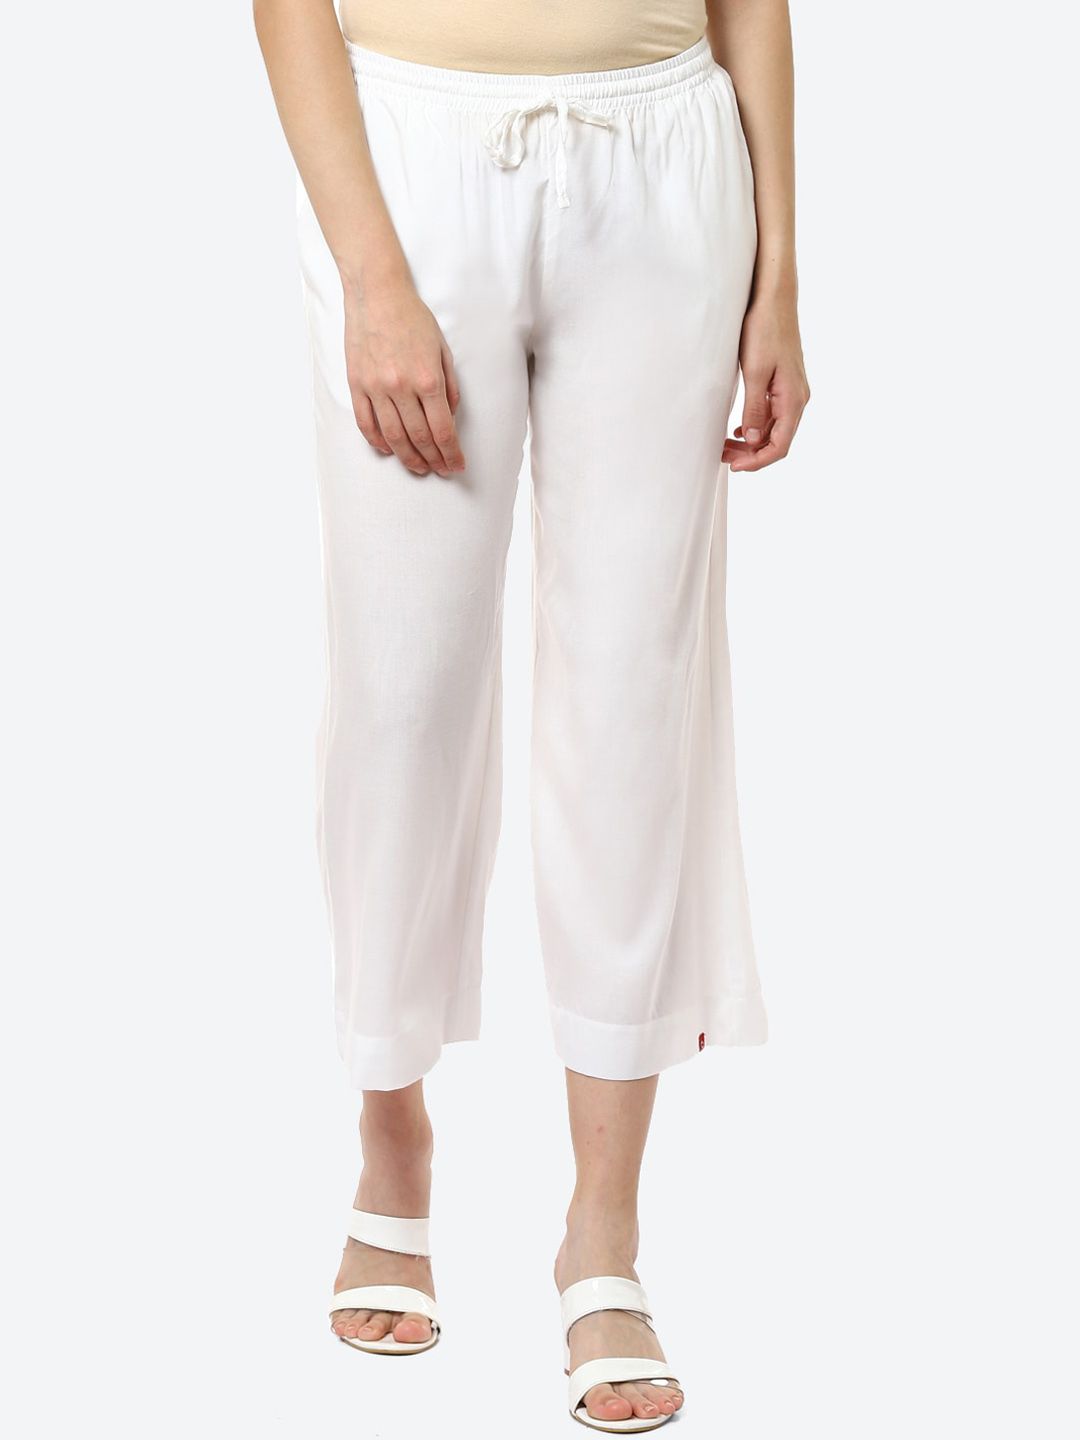 Biba Women Plus Size Off White Straight Fit Culottes Trousers Price in India